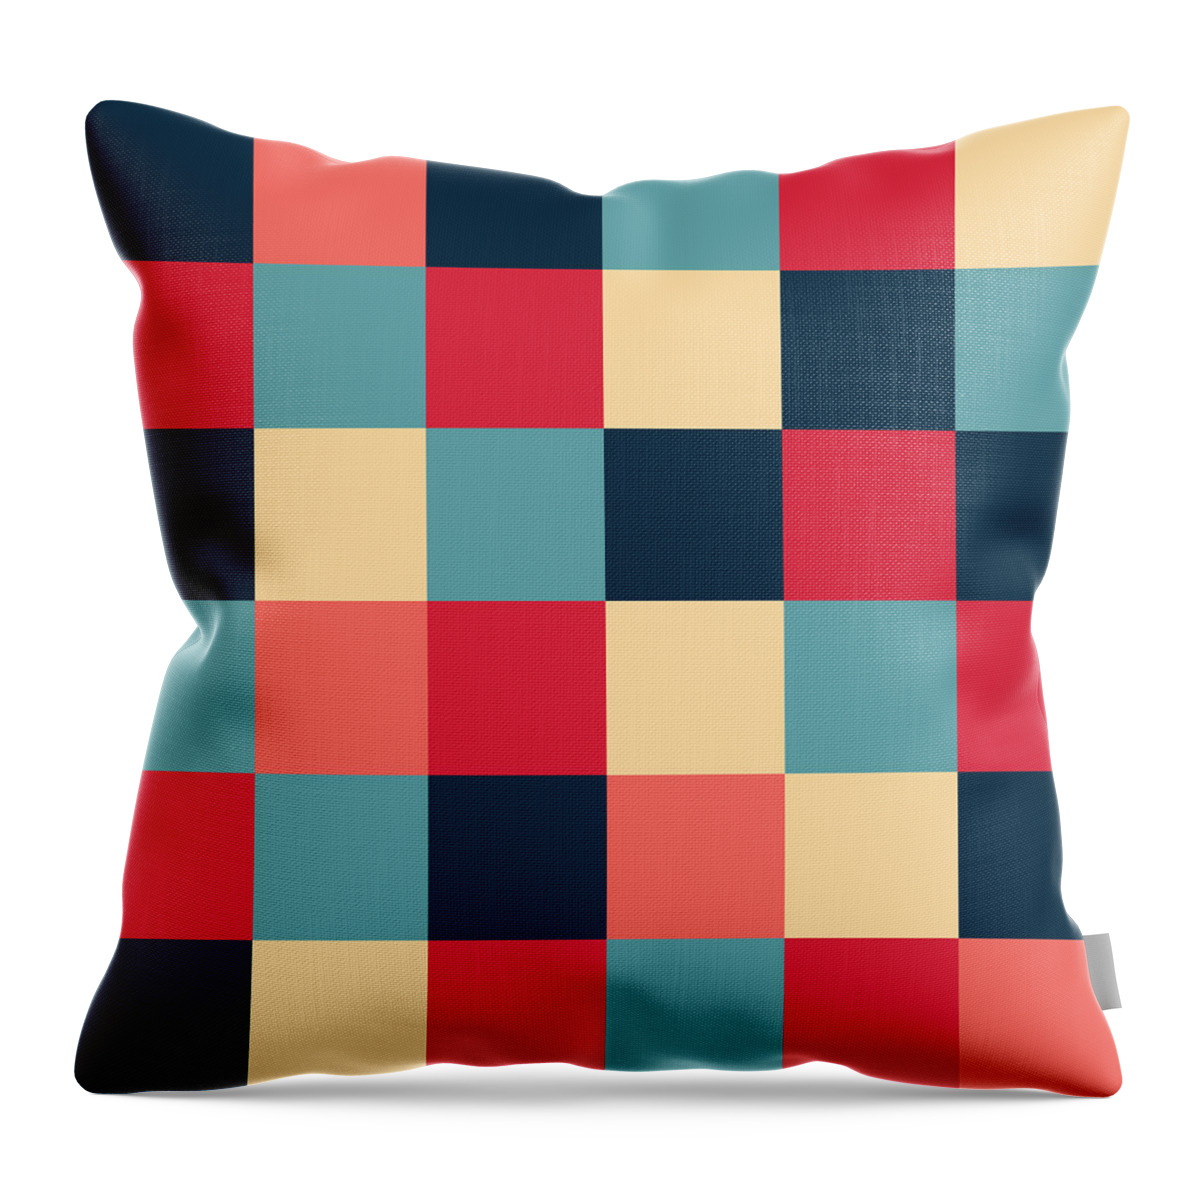 Abstract Throw Pillow featuring the digital art Artwork Pattern by Mike Taylor